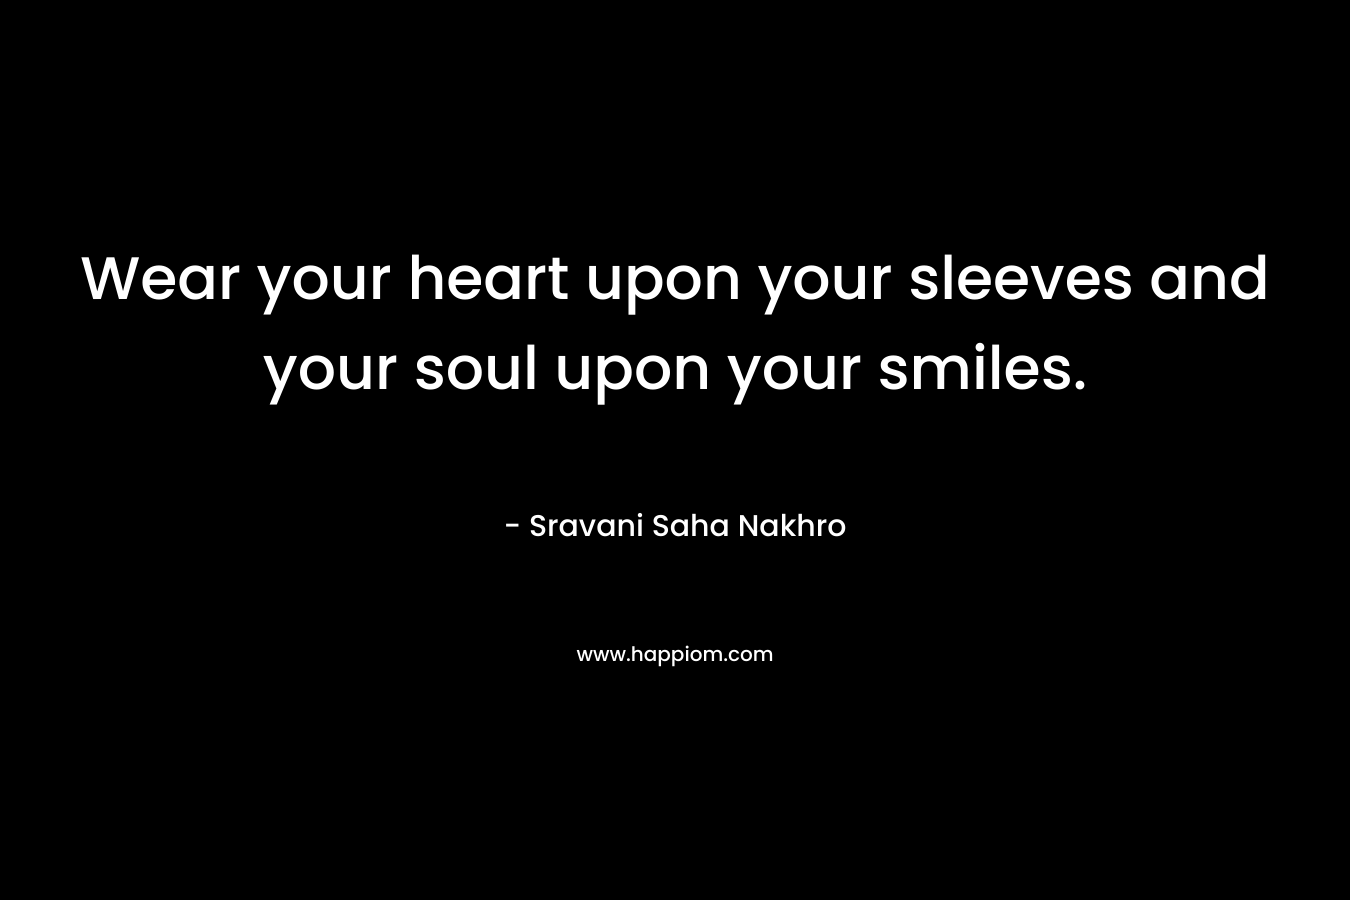 Wear your heart upon your sleeves and your soul upon your smiles.